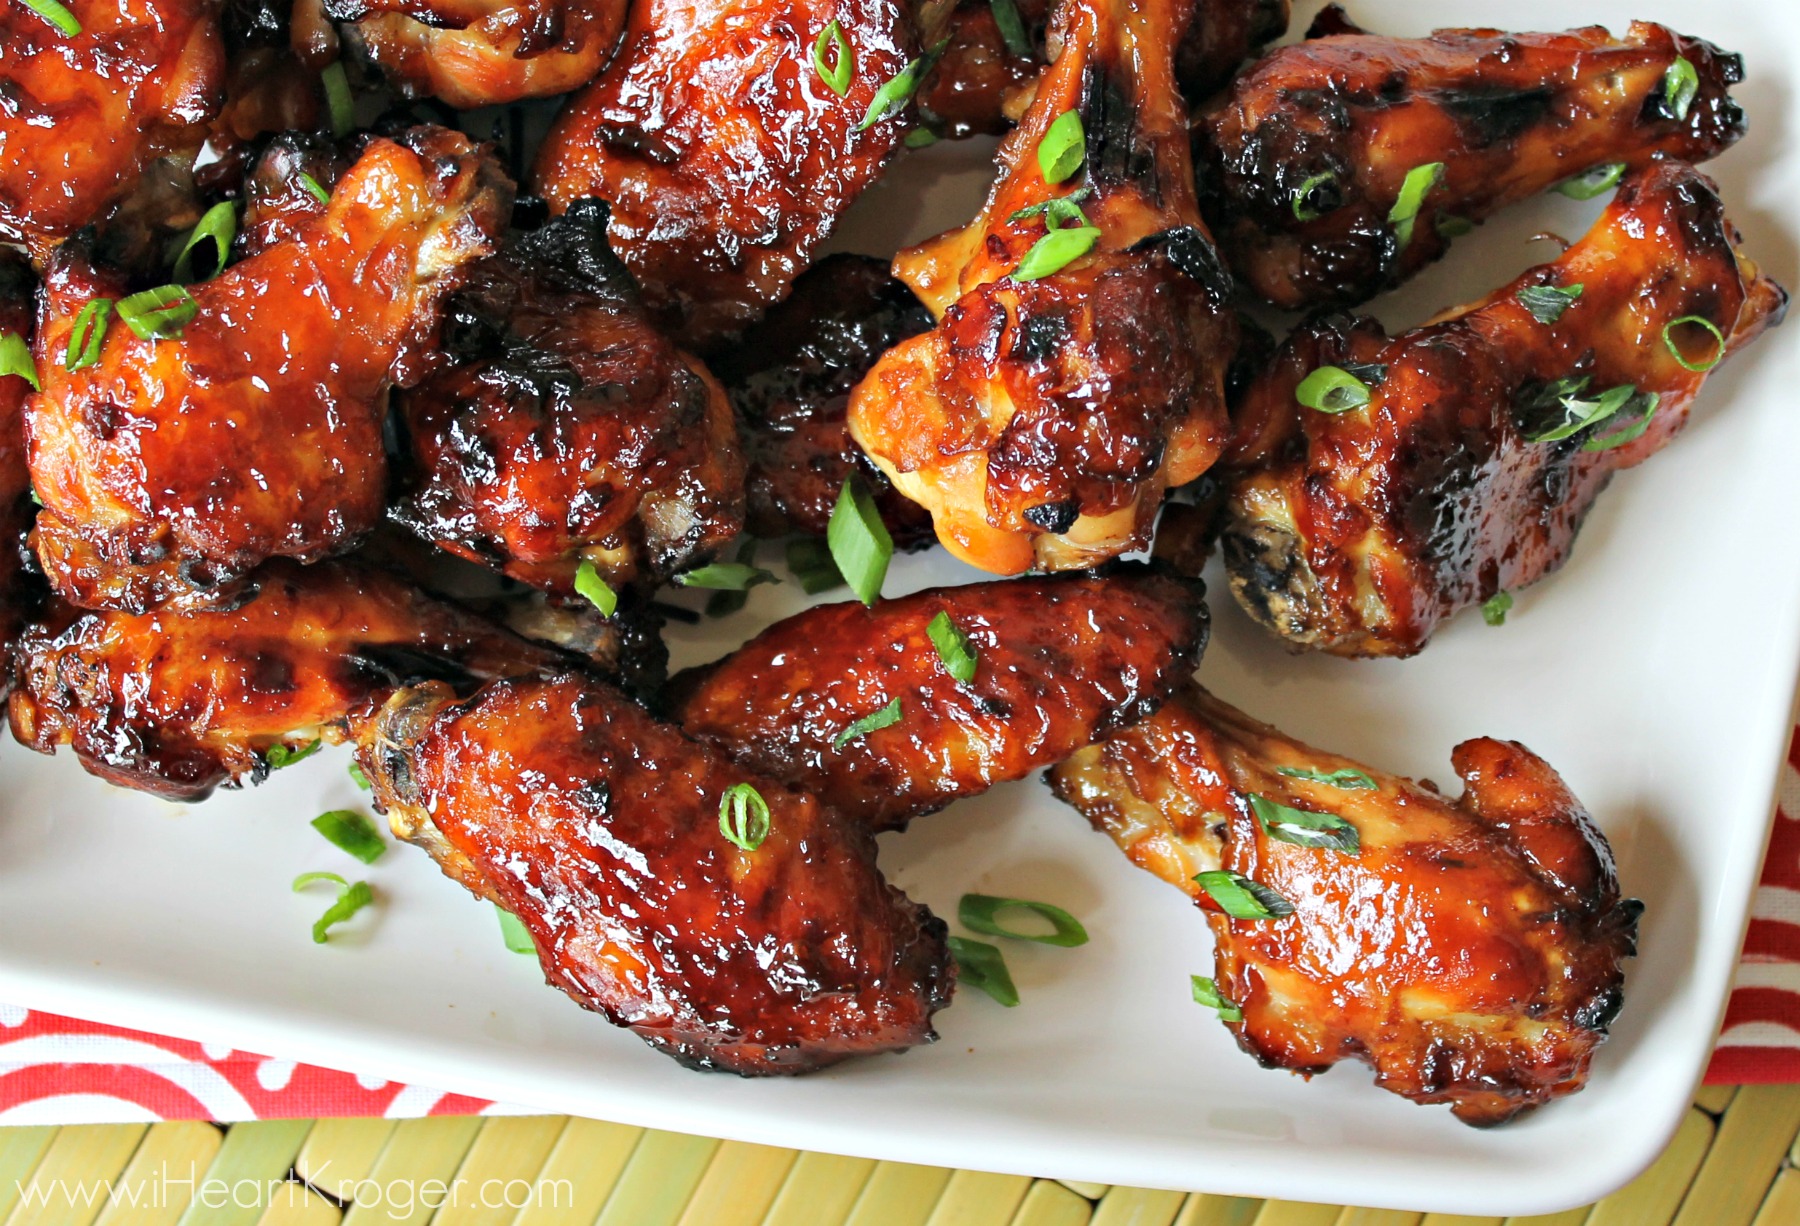 Heritage Farm Chicken Party Wings Just $7.99 Per Bag (Regular Price $11.99)